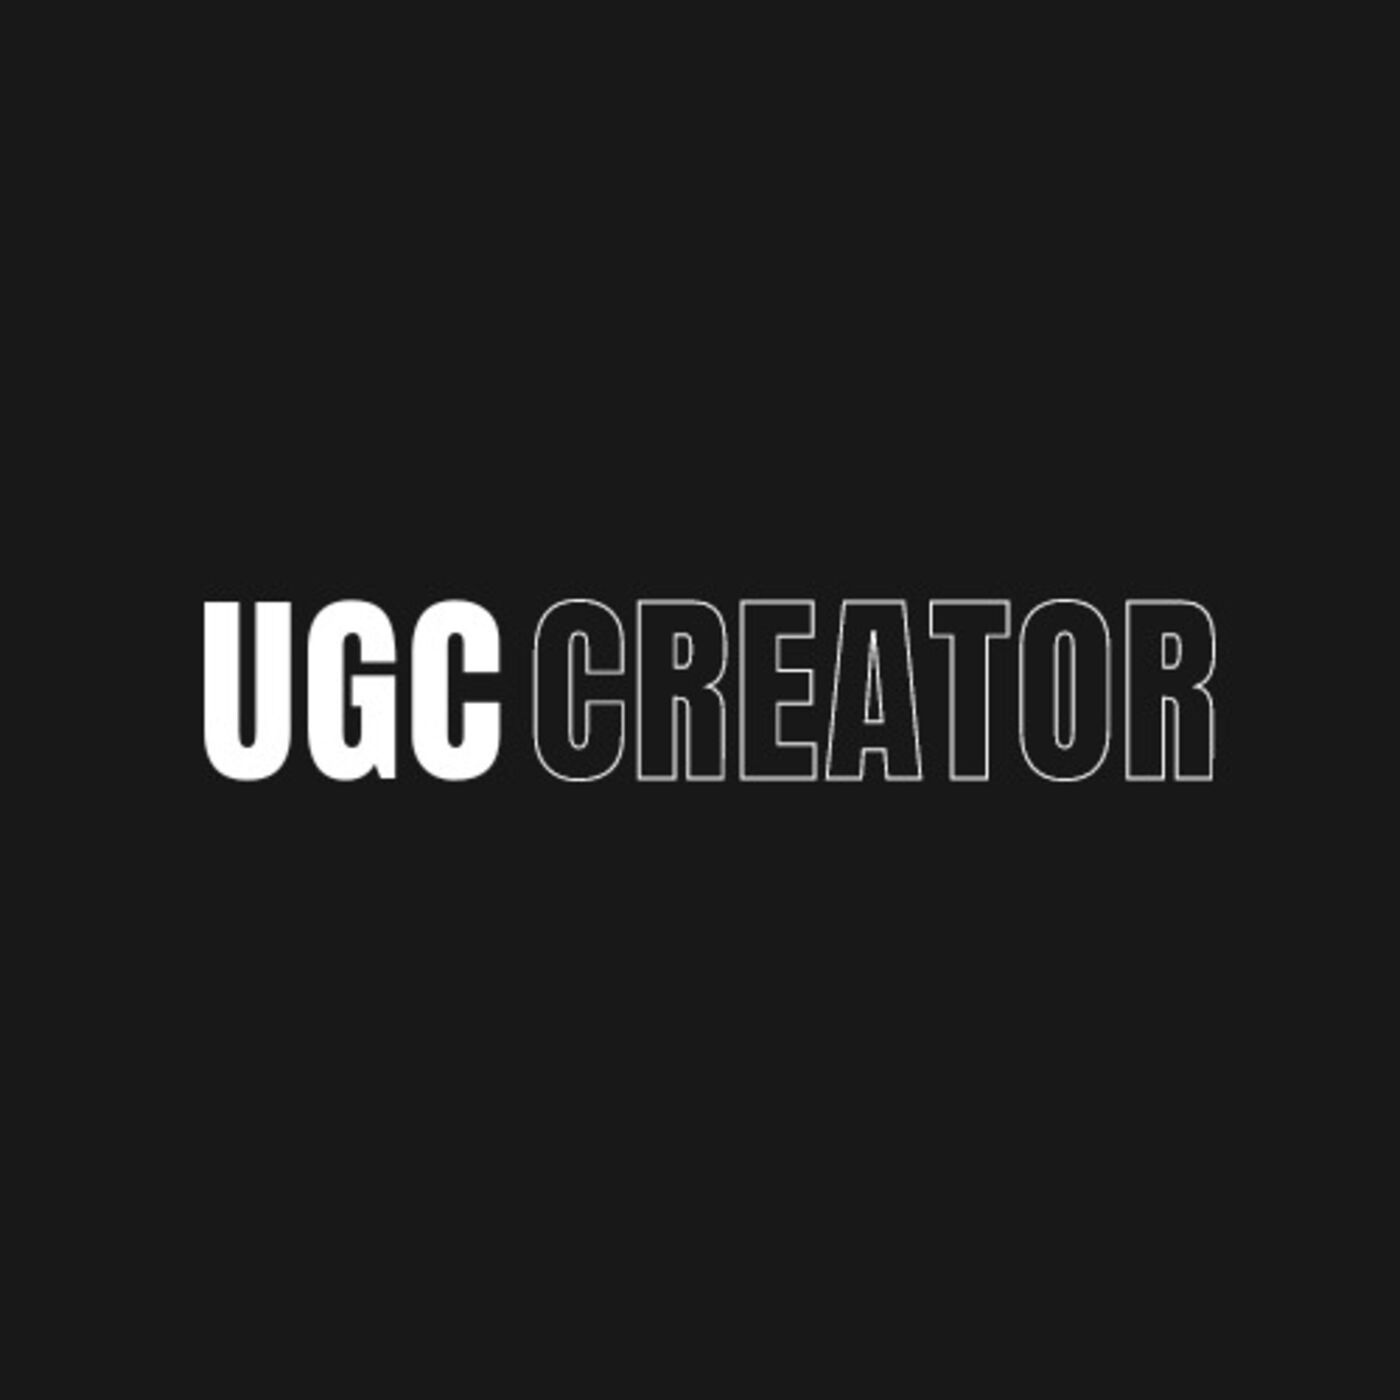 How To Be A UGC Creator | UGCcreator.com by vctr